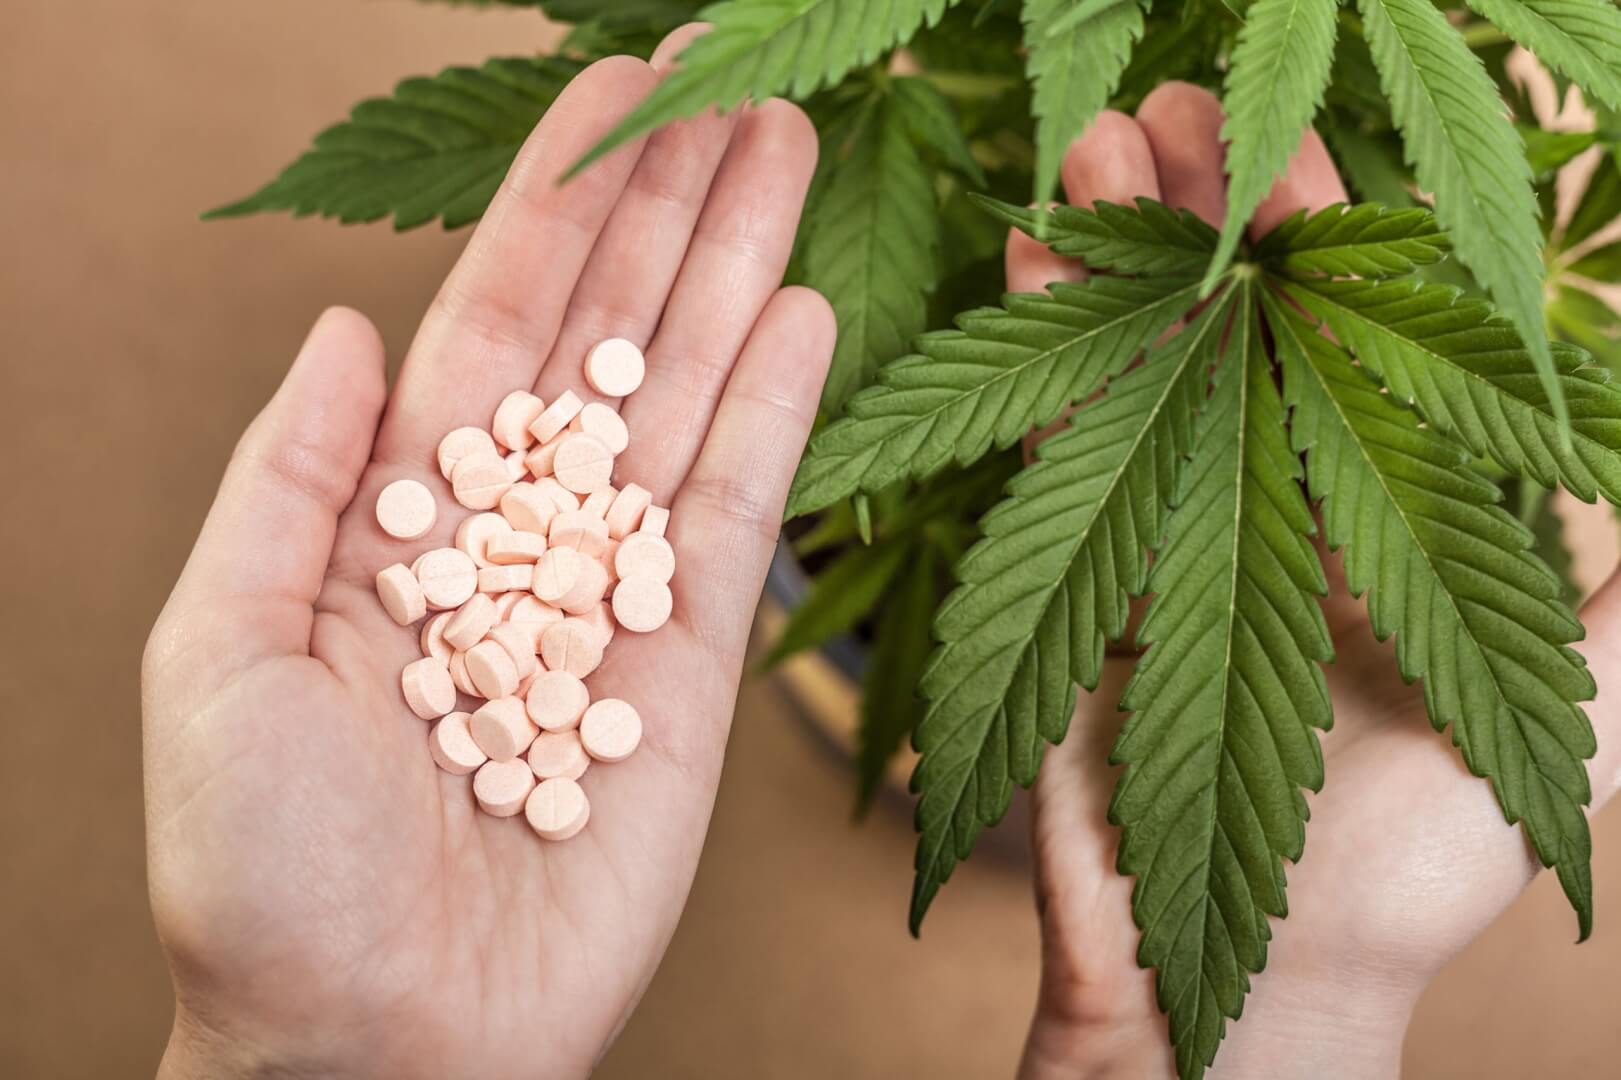 Does Weed Interact With Any Medications?